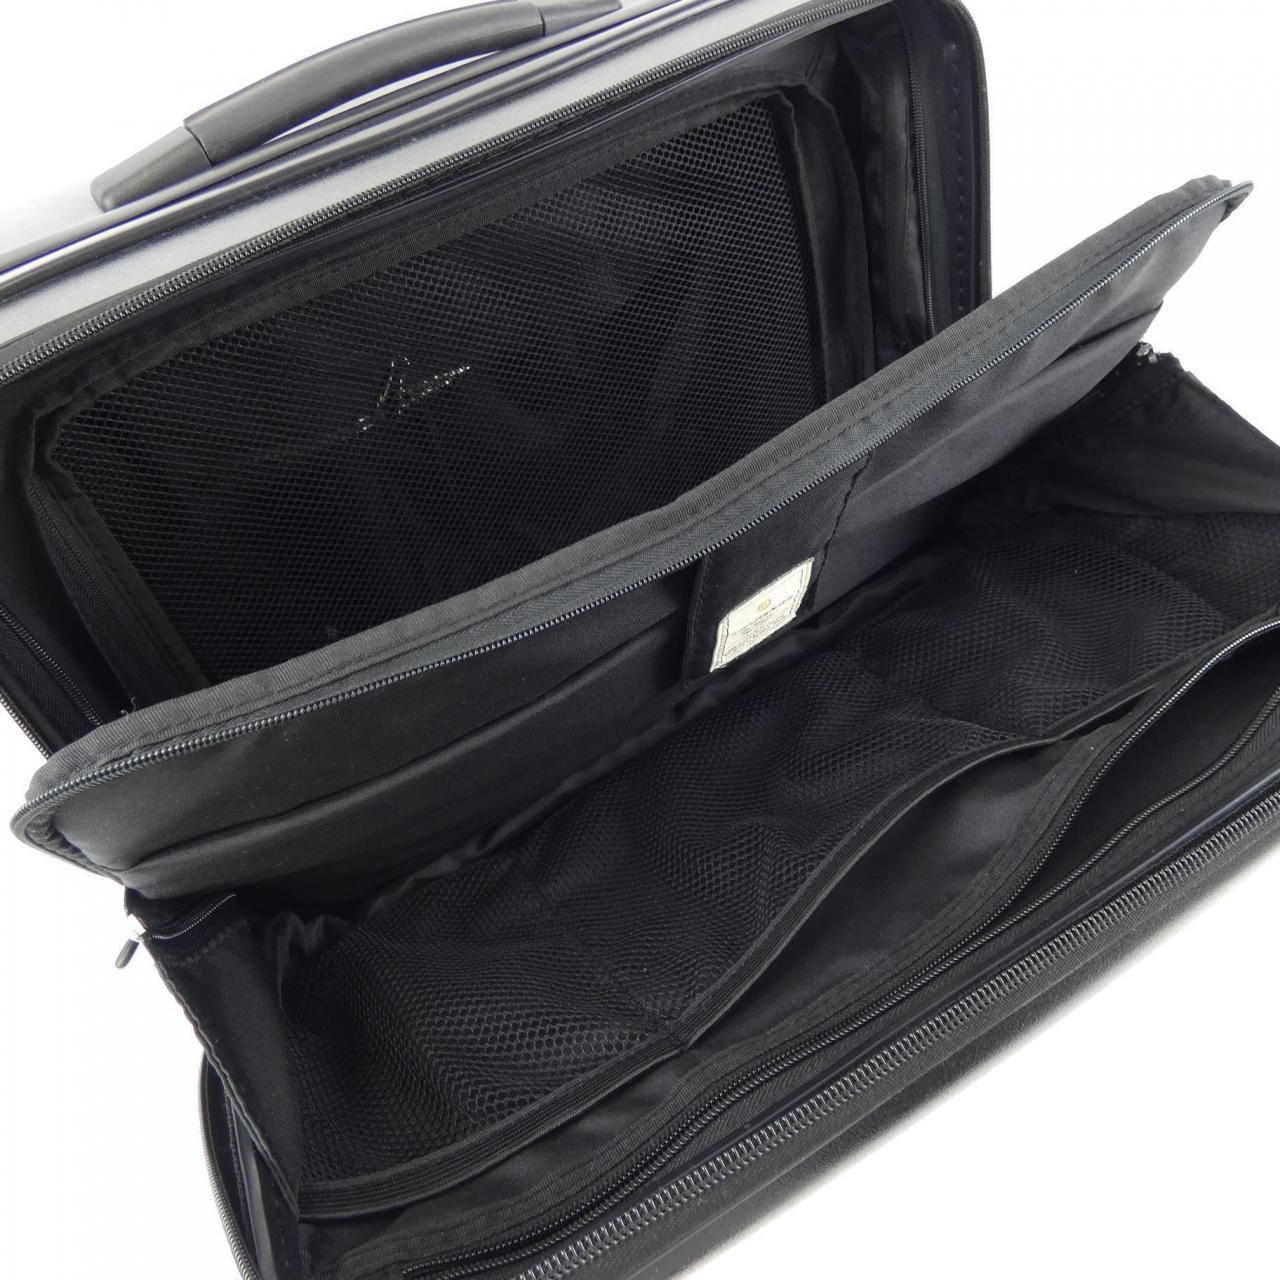 FREQUENTER CARRY BAG